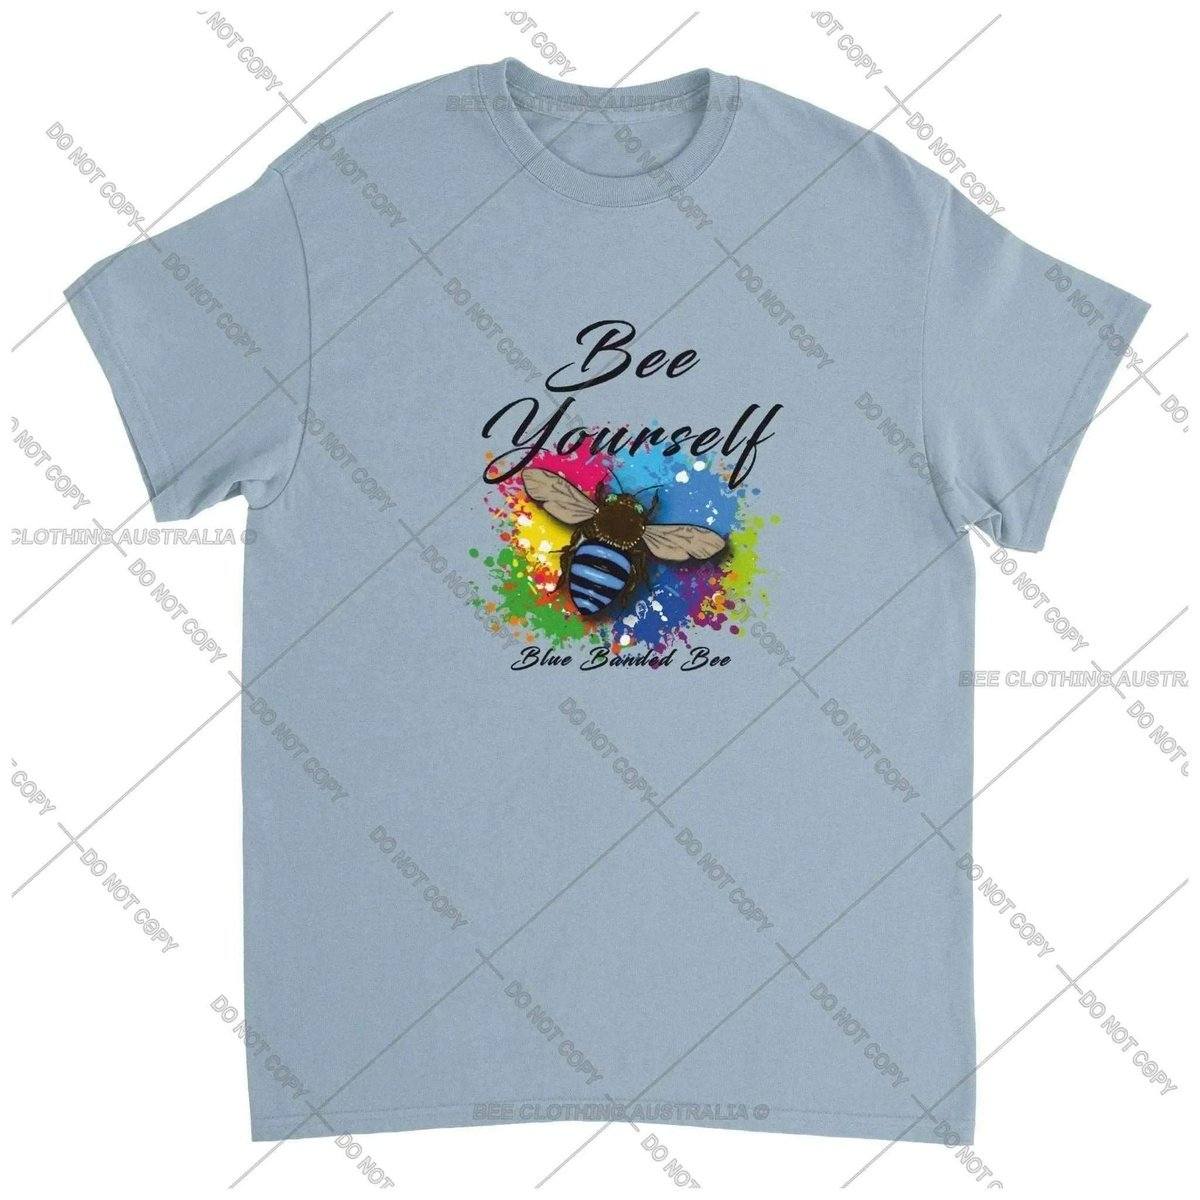 Bee Yourself - Blue Banded Bee - Native Bee T-Shirt Unisex Adults T-Shirts Unisex Light Blue / S Bee Clothing Australia